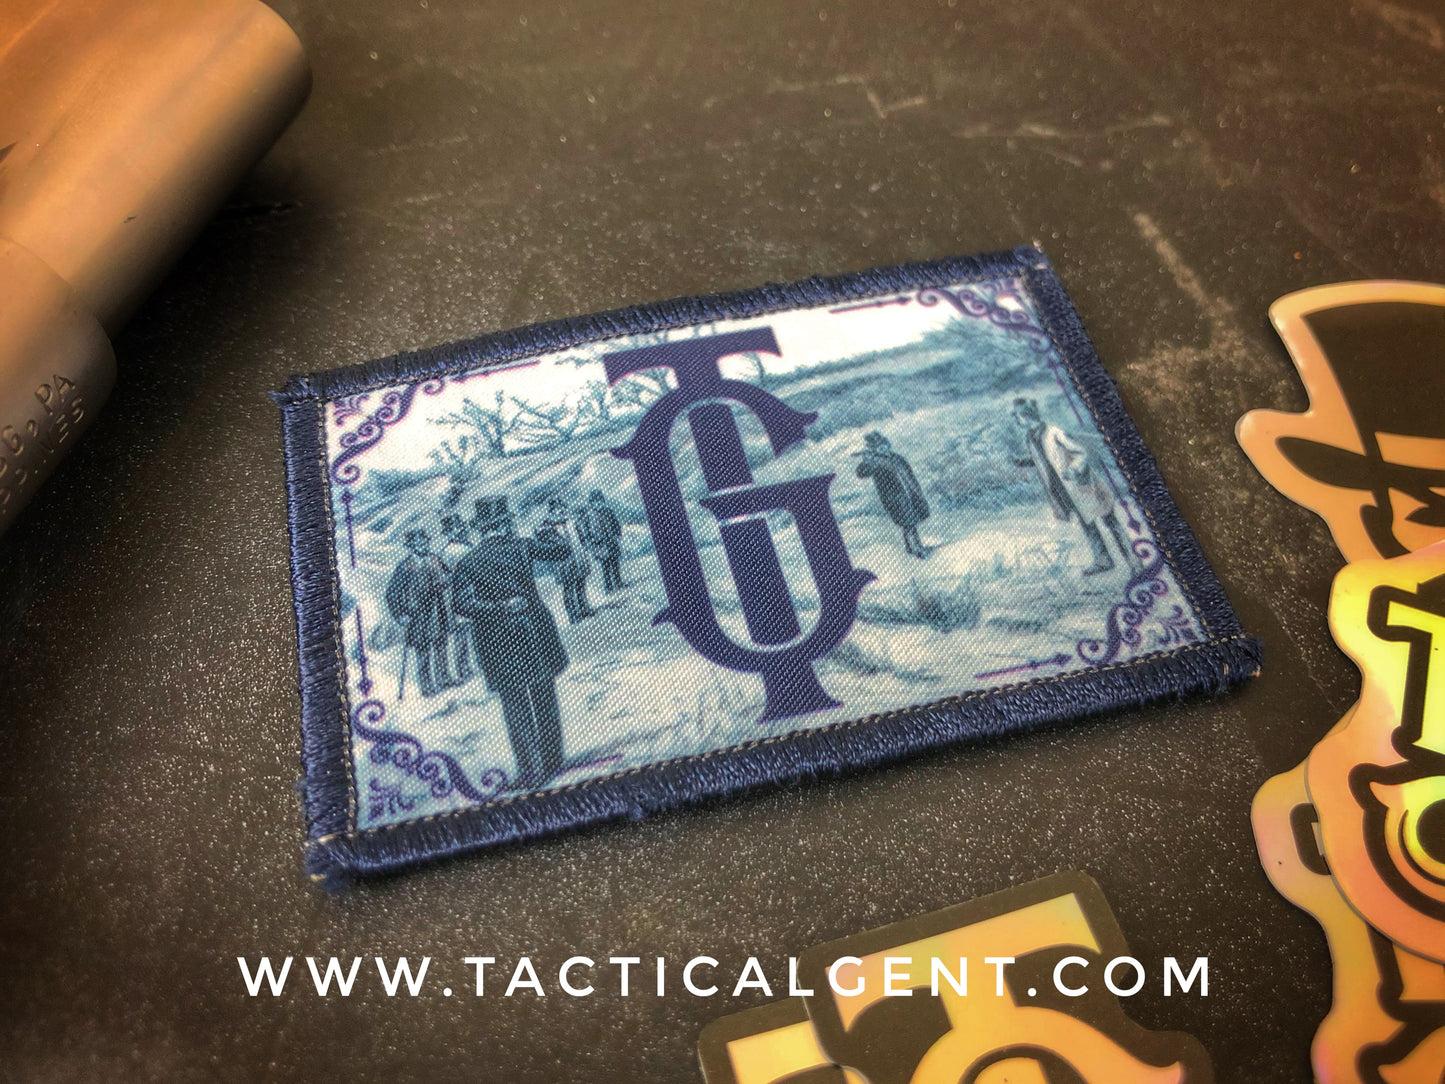 "Dueling Fields" Patch & Decal Set.